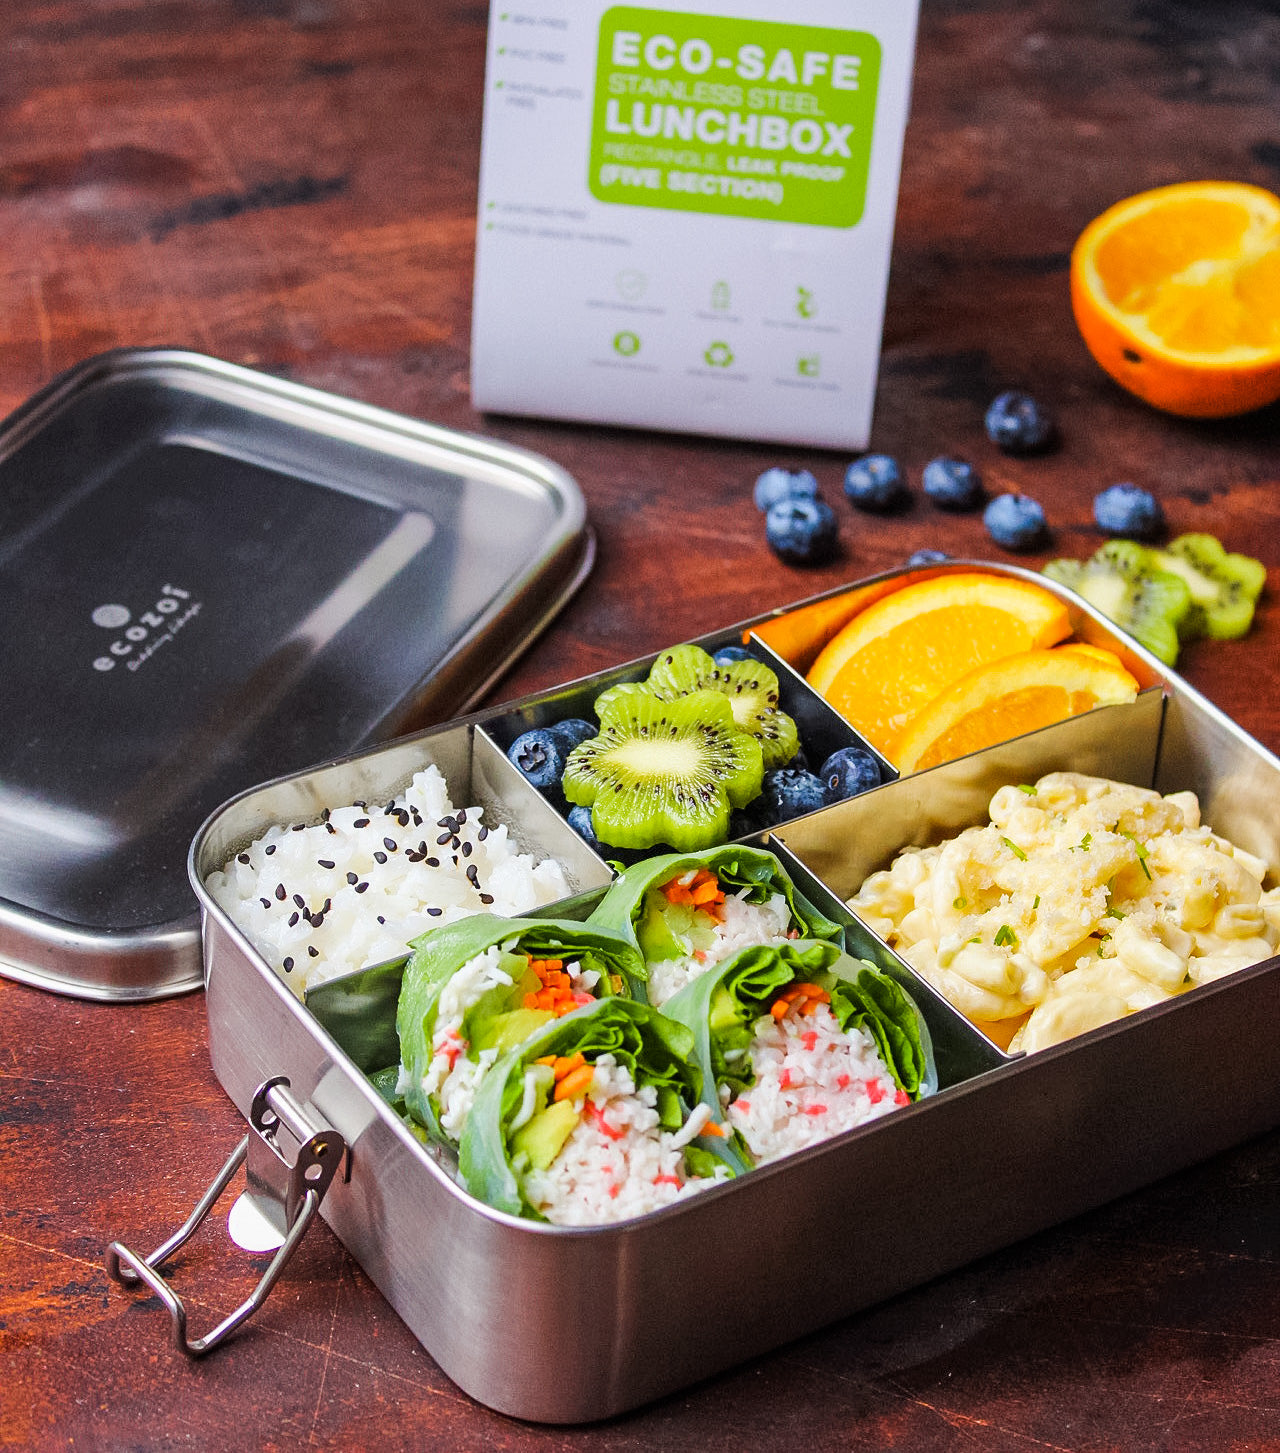 ecozoi Stainless Steel Lunch Box, 5 Compartment, Leak Proof, 50 oz